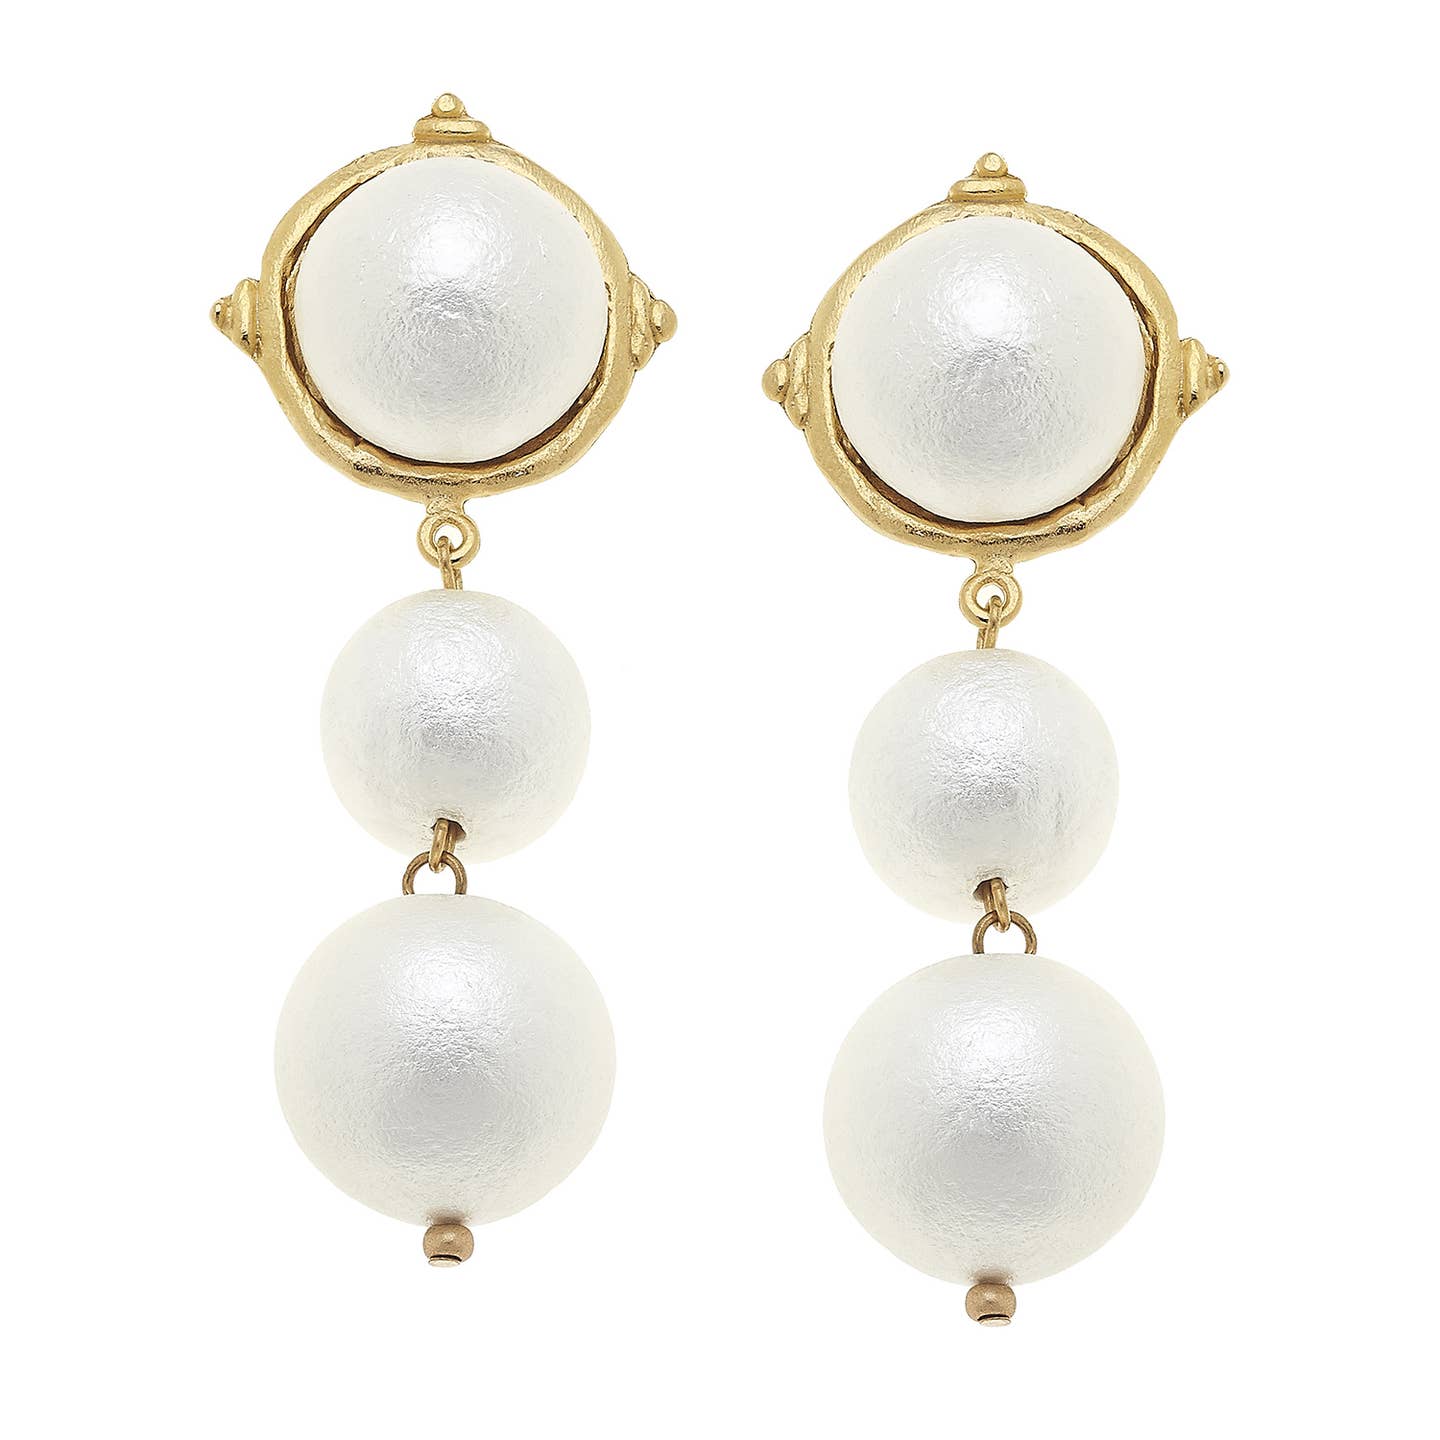 GOLD COTTON PEARL CAB AND 2 COTTON PEARL DROP EARRING